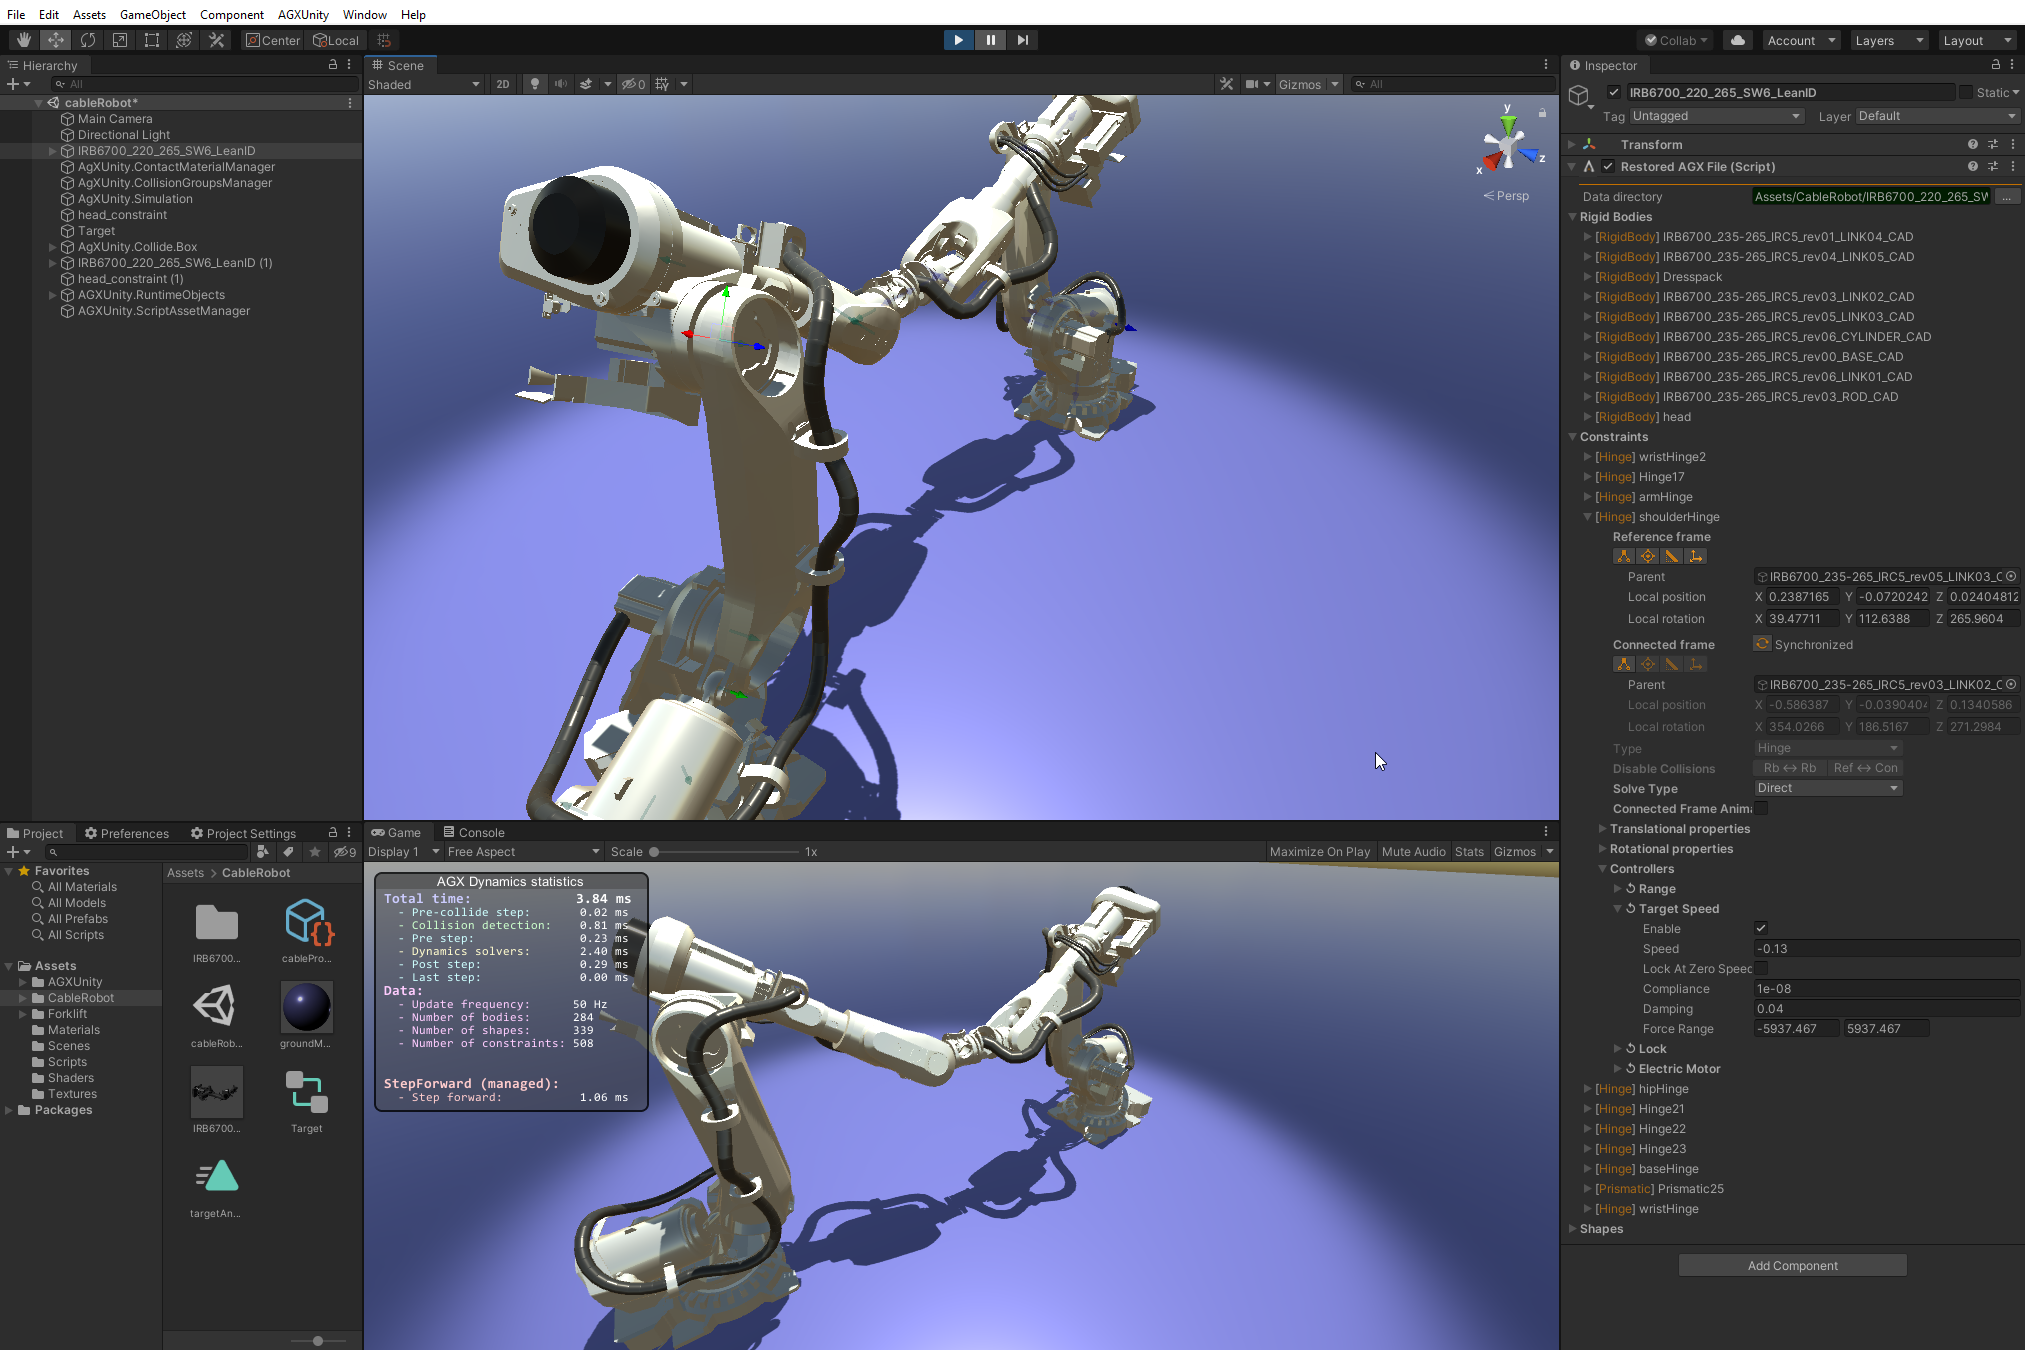 _images/agx_for_unity_robots_large.png